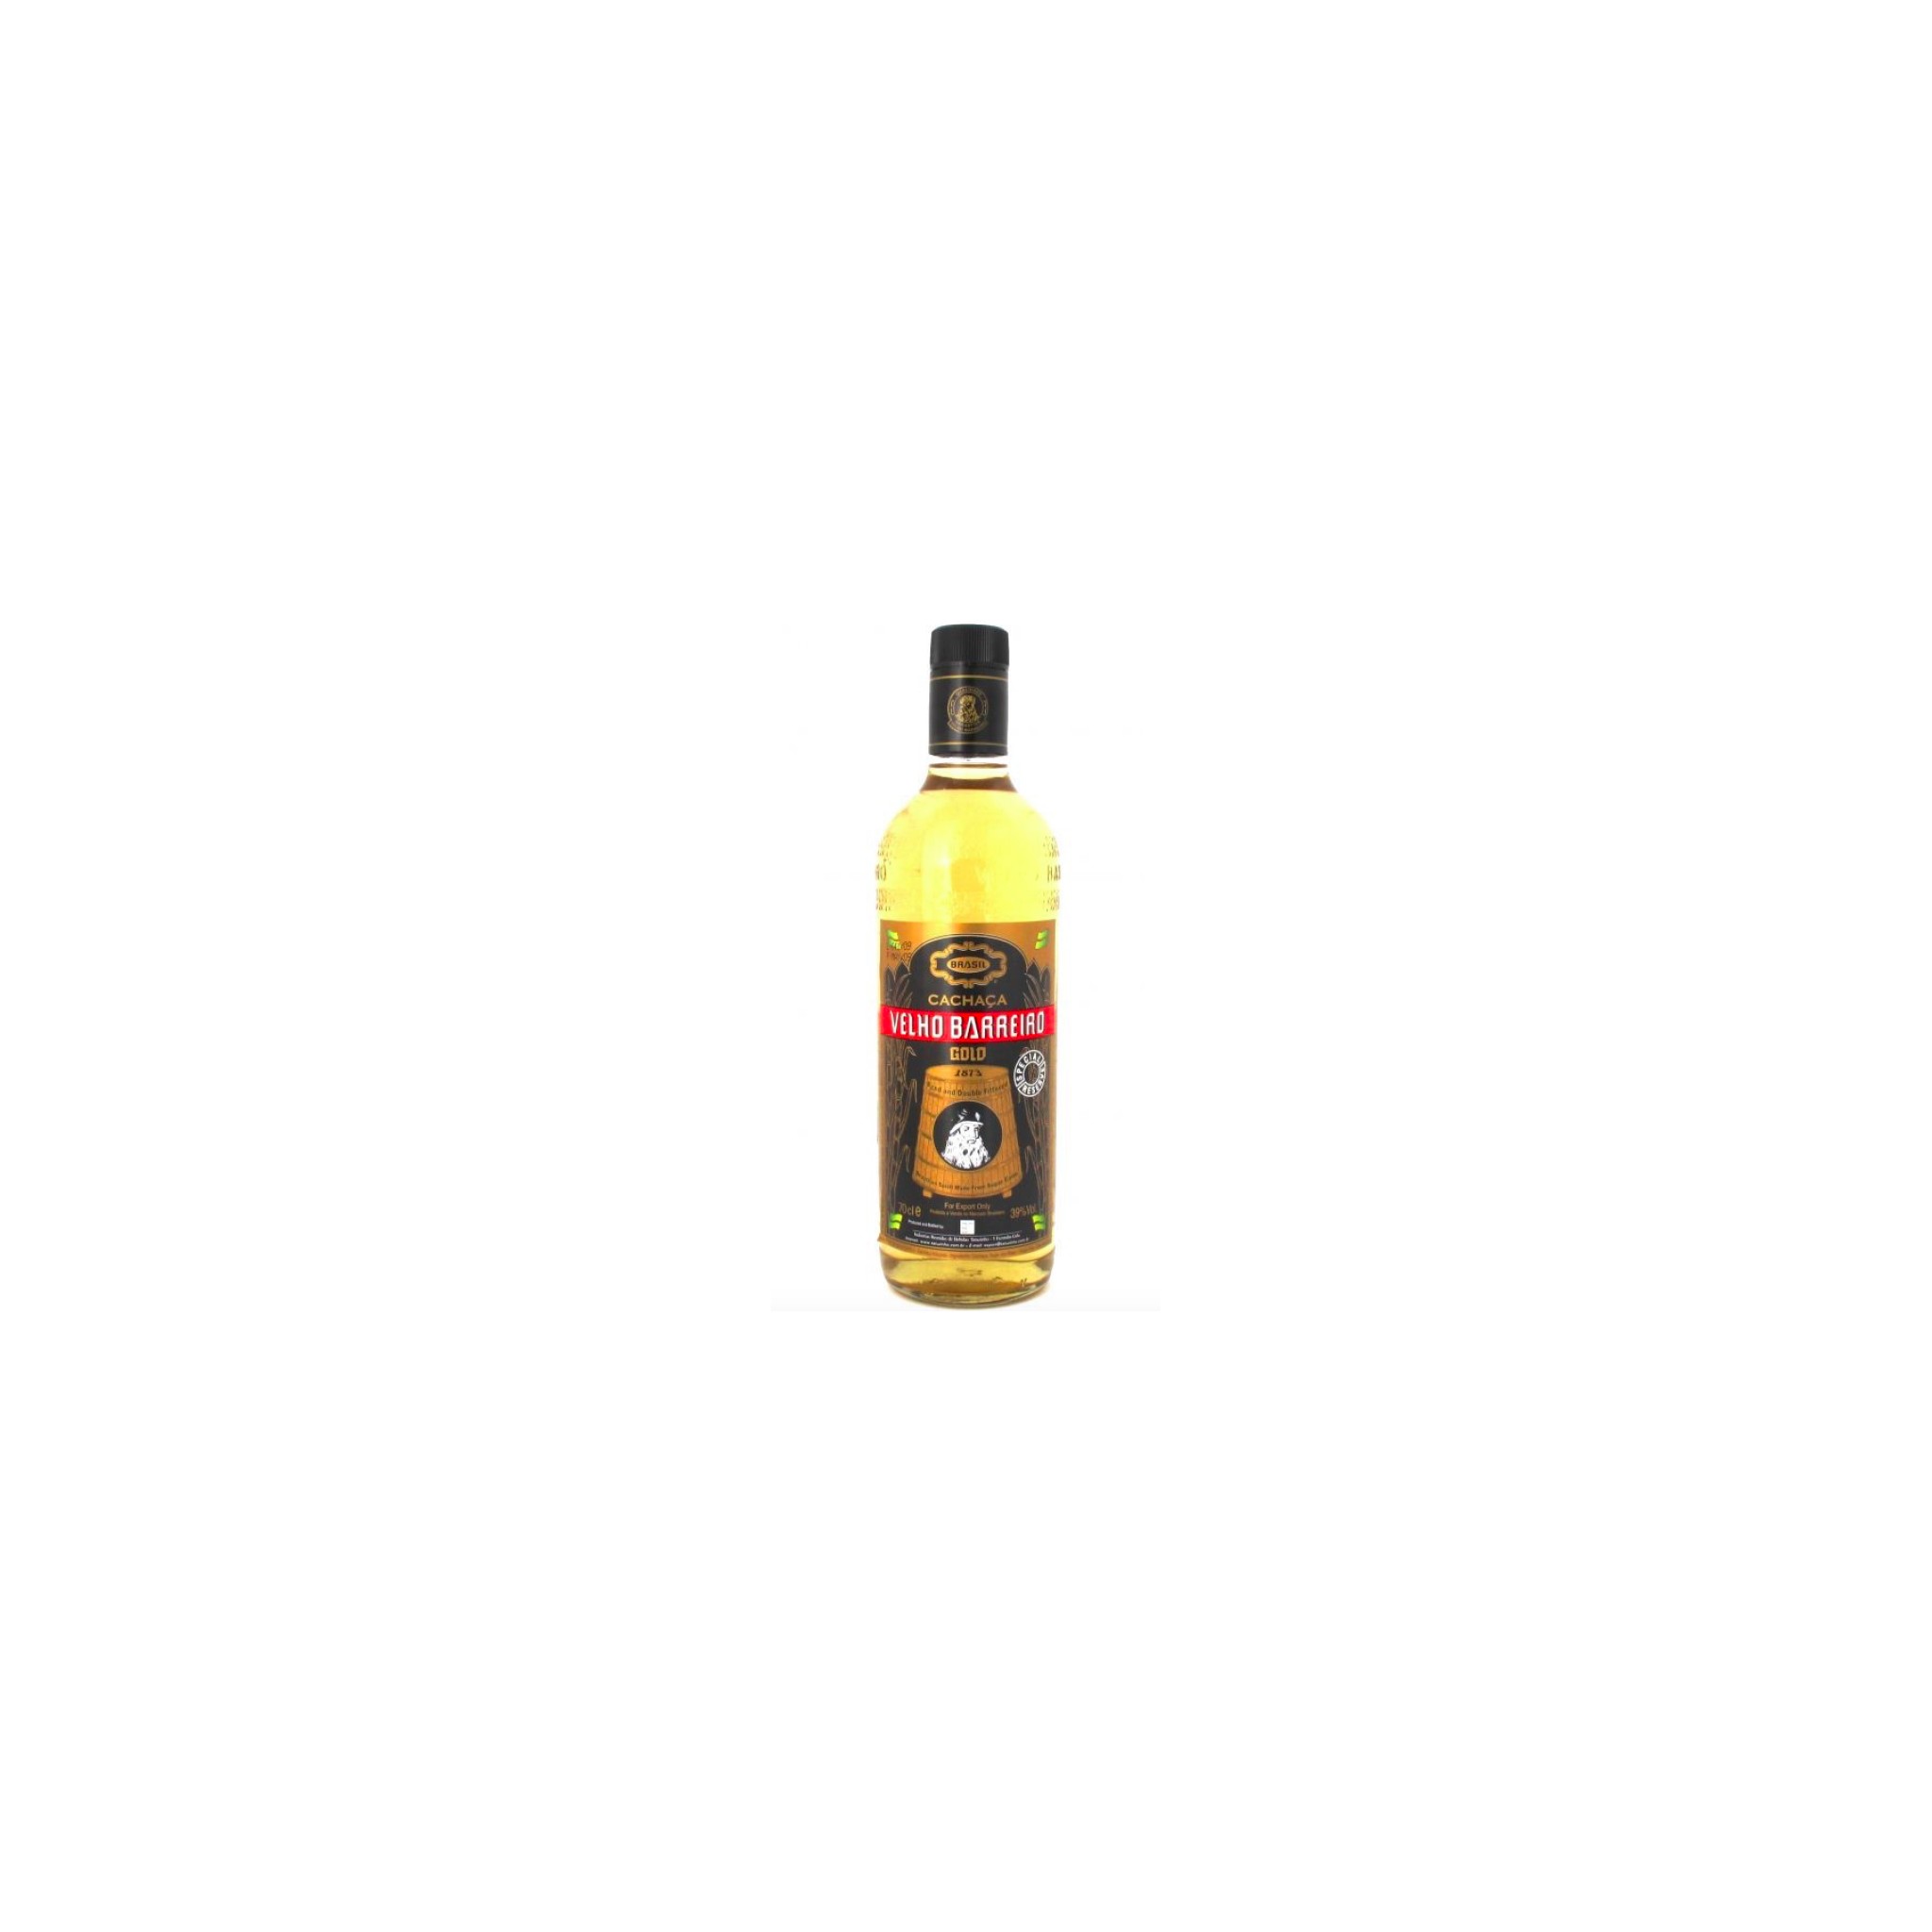 Sale 101 BRANDY, OF SPANISH FRENCH Corso Online SELECTION OUR COGNAC SPIRITS, Vulpitta